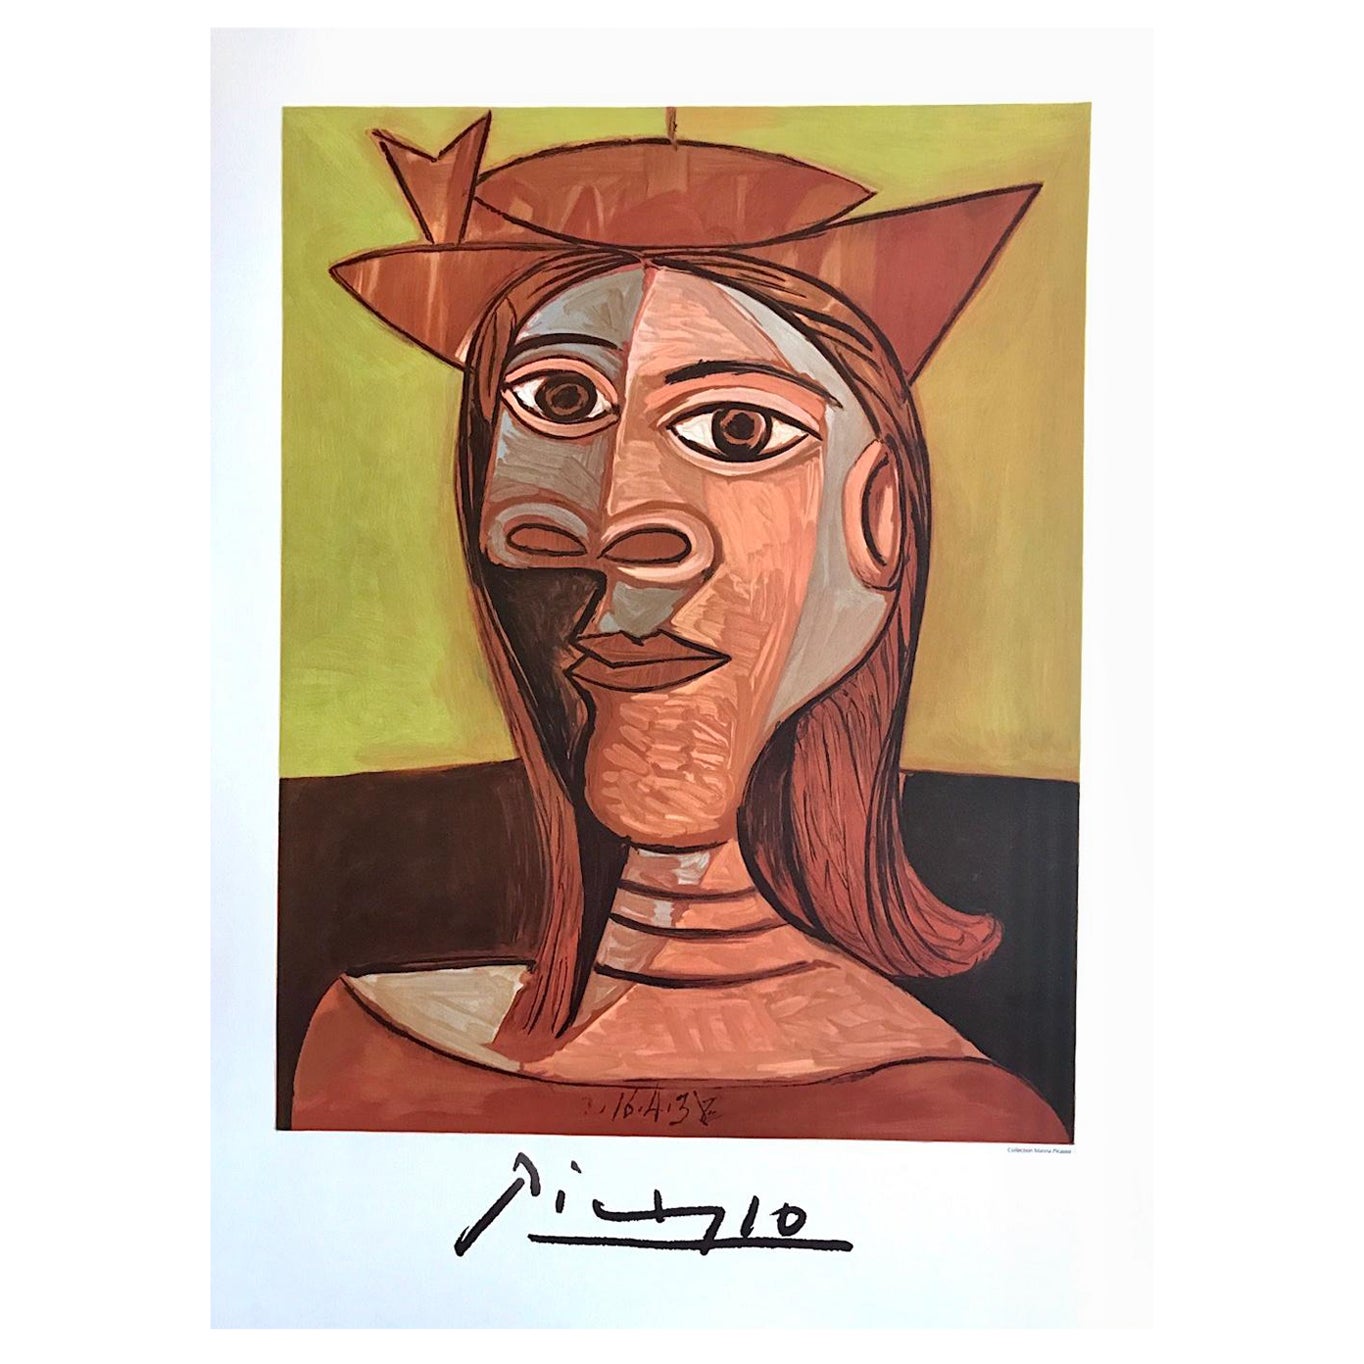 (after) Pablo Picasso Abstract Print - Tete de Femme, Lithograph, Abstract Portrait Head, Woman in Hat Terra Cotta Pink